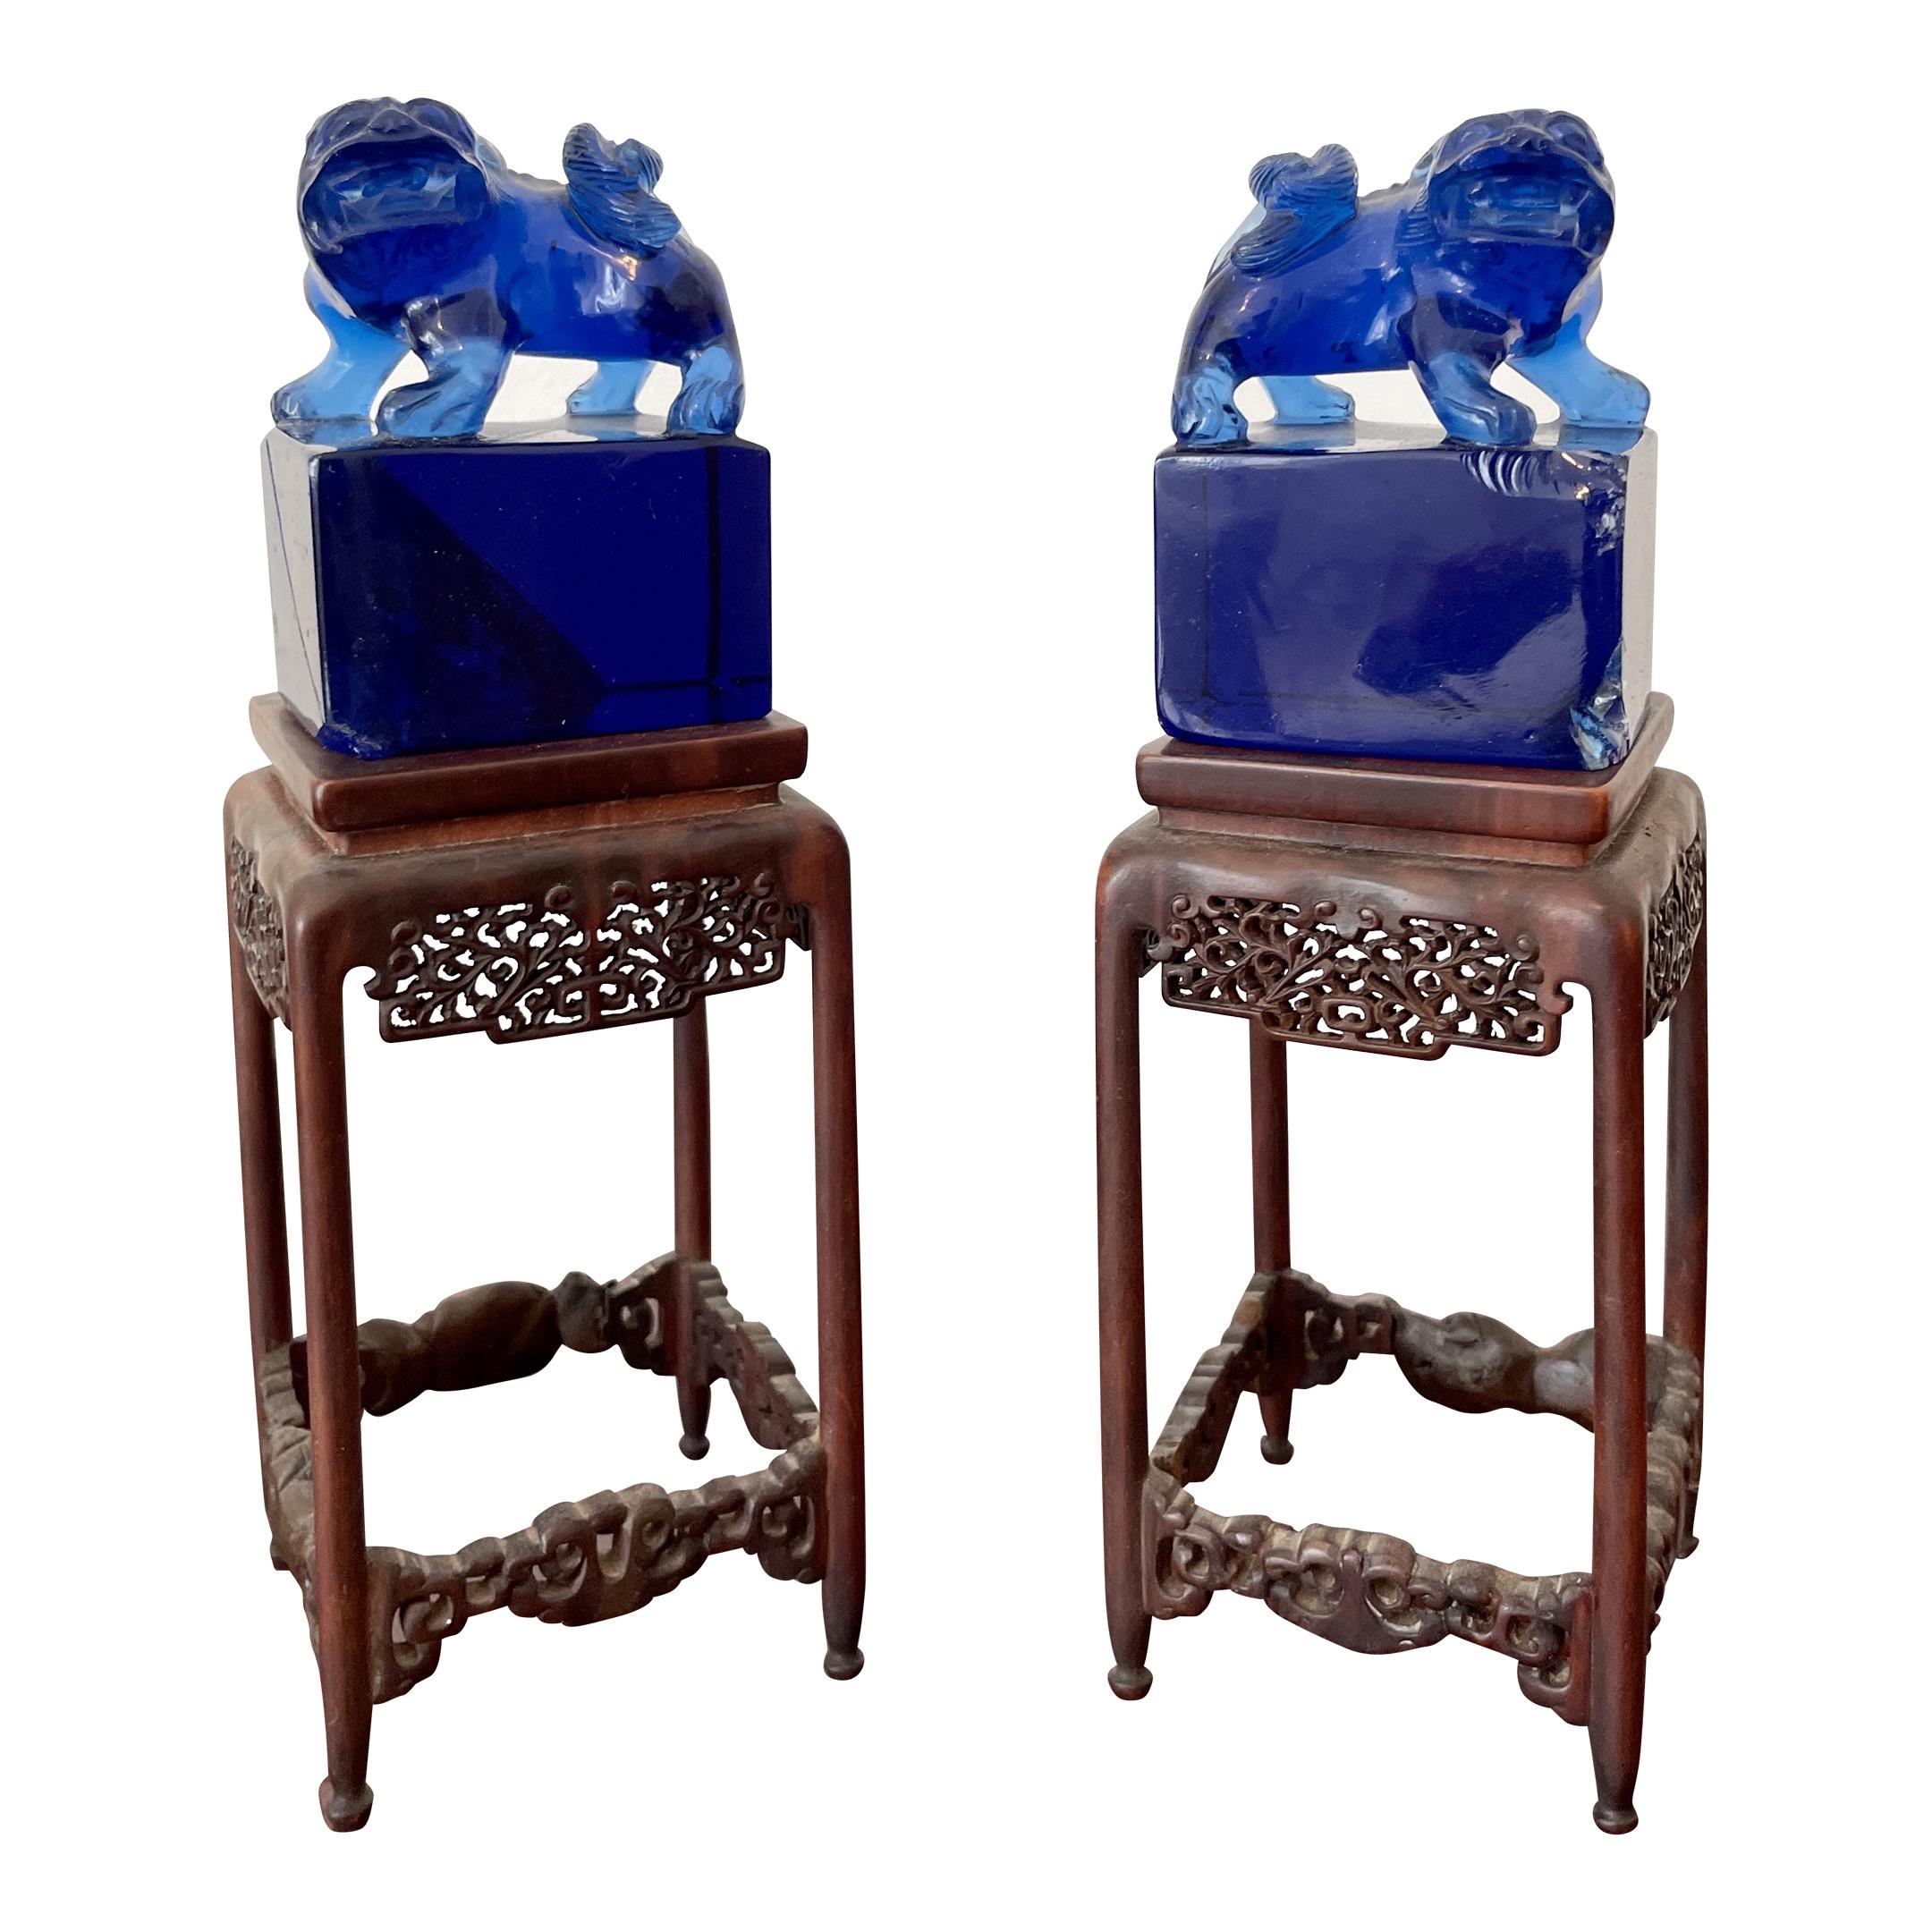 Small Blue Glass Foo Dogs on a Base, a Pair